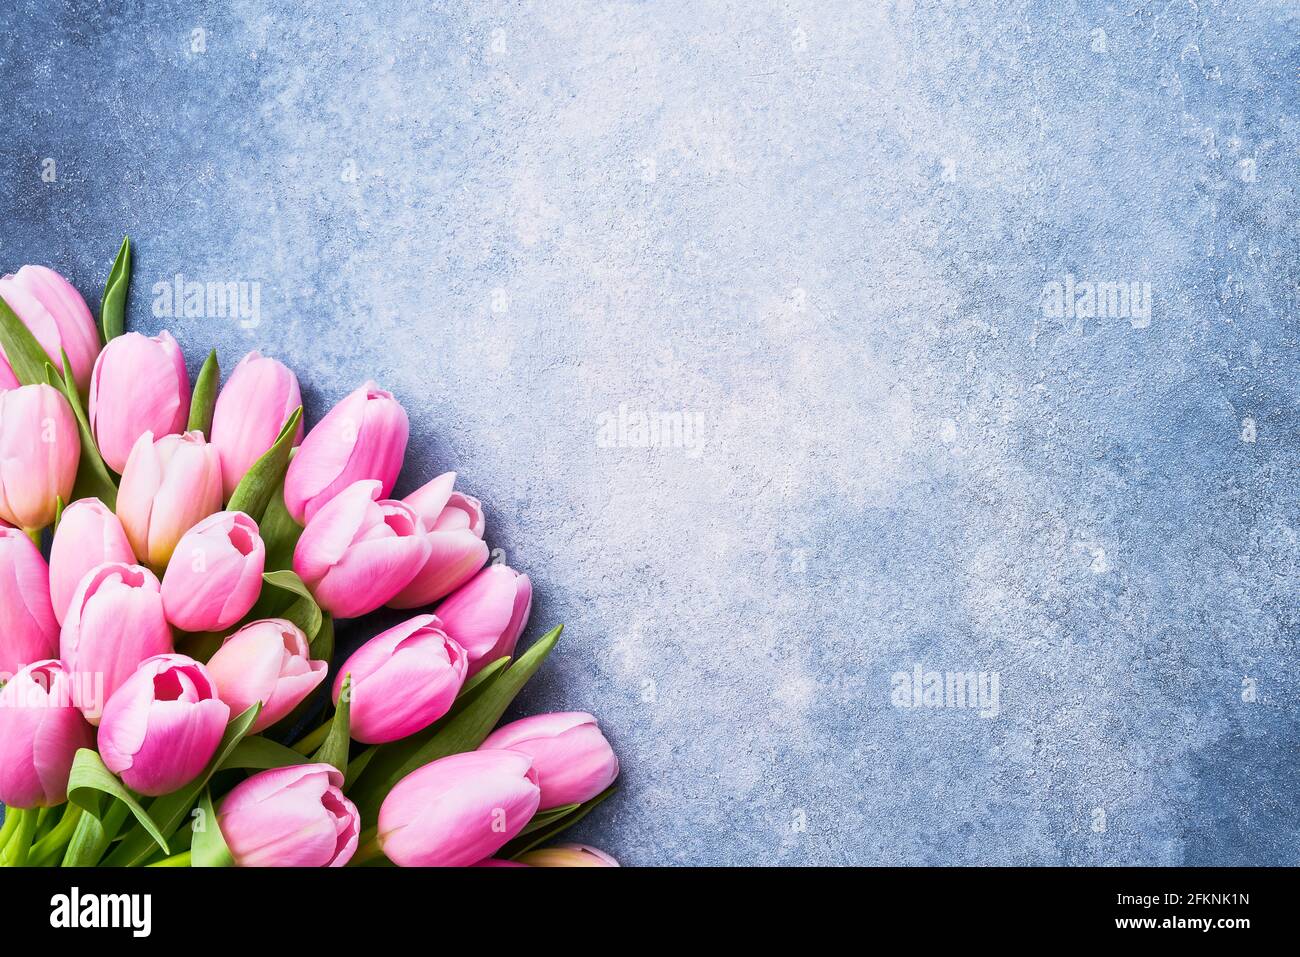 Bouquet of pink tulips on a bright blue background. Mothers Day, Valentines Day, birthday celebration concept. Top view, copy space for text Stock Photo